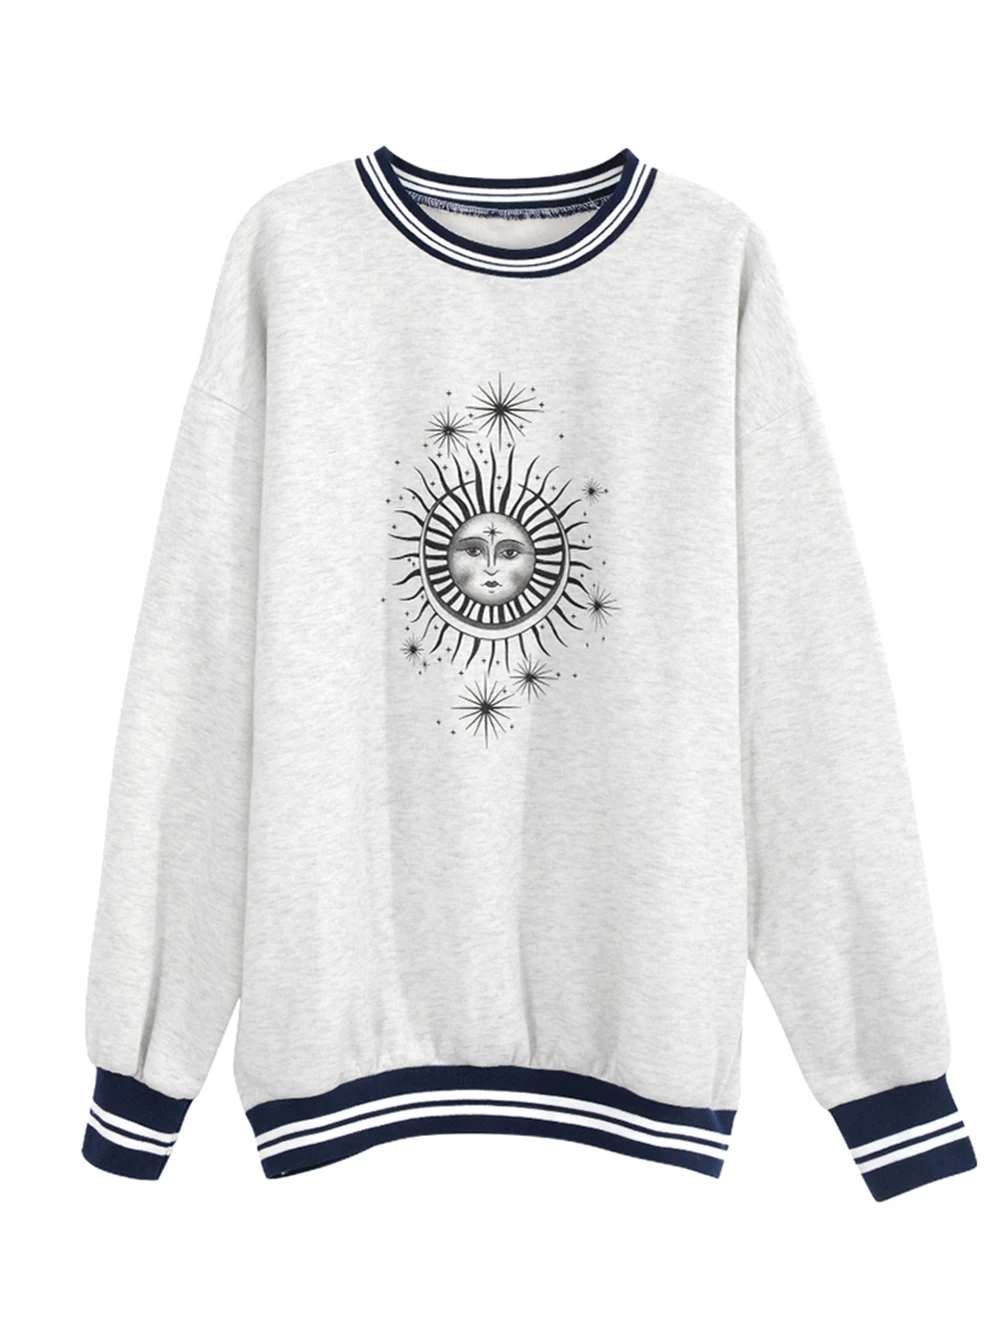 Autumn Winter Sun Star Sweatershirts Womens Casual Loose Pullover Cute Youg Girls Hoodies Female Clothes Gray Oversize